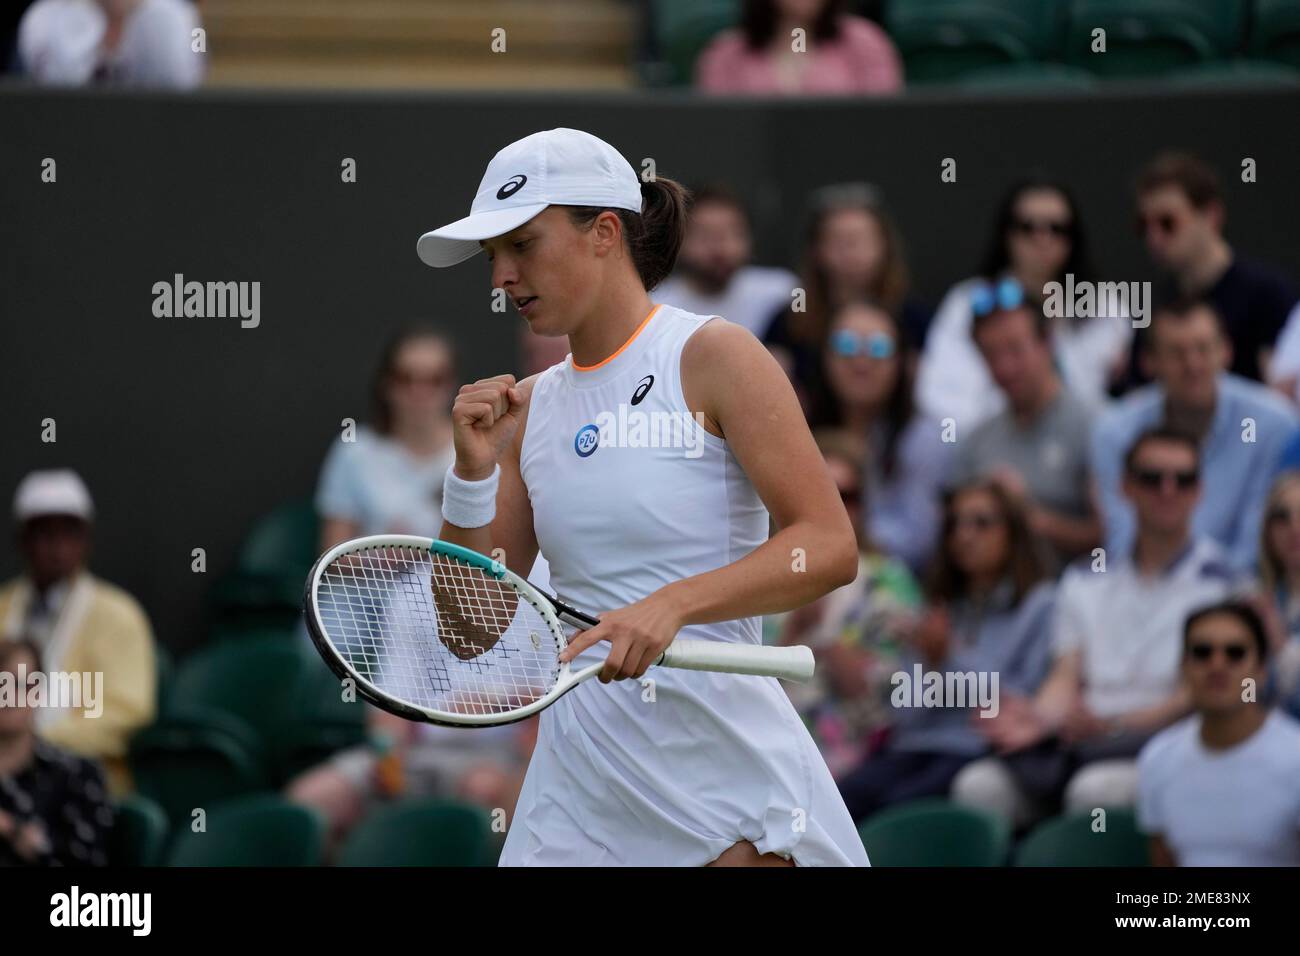 Polands Iga Swiatek celebrates a point against Tunisias Ons Jabeur during the womens singles fourth round match on day seven of the Wimbledon Tennis Championships in London, Monday, July 5, 2021